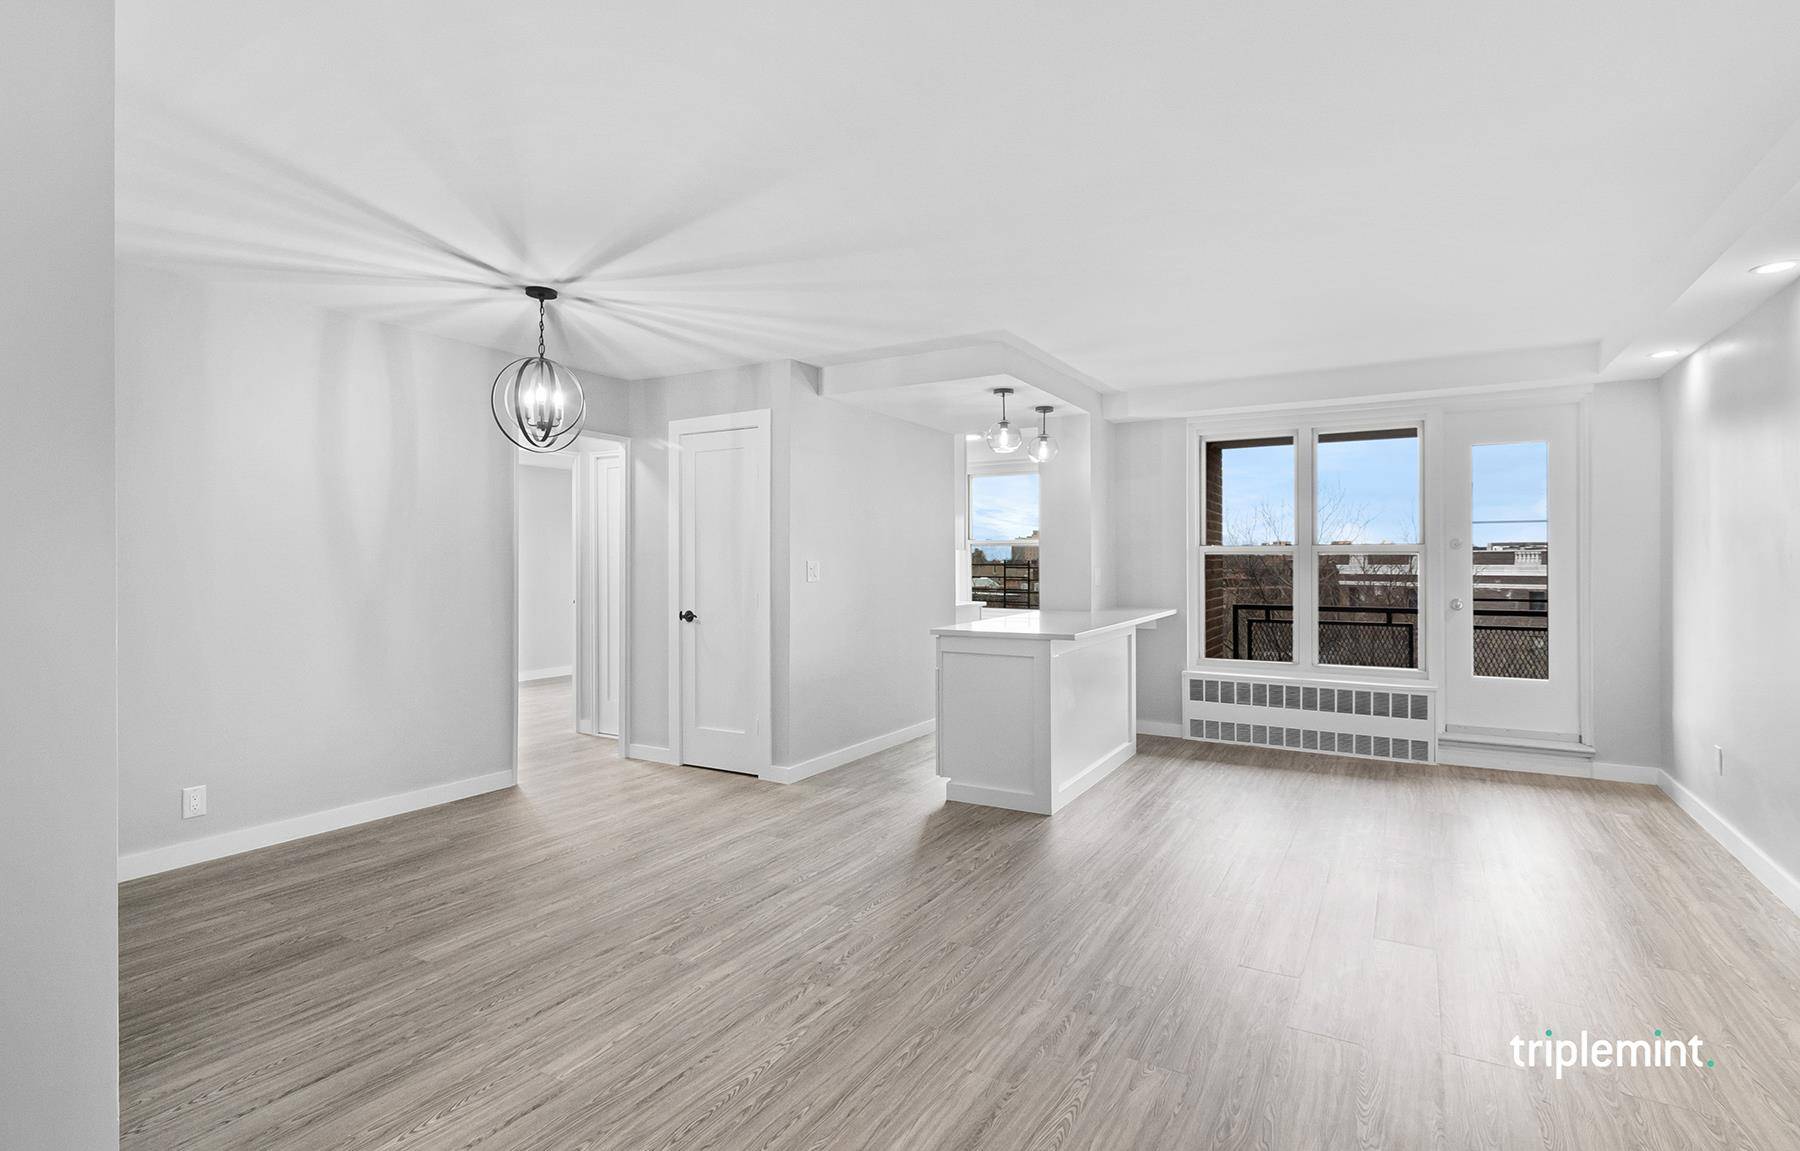 Welcome to 8D, a tastefully renovated, light drenched and spacious two bedroom apartment in Roosevelt Terrace cooperative, in Jackson Heights' historic district.